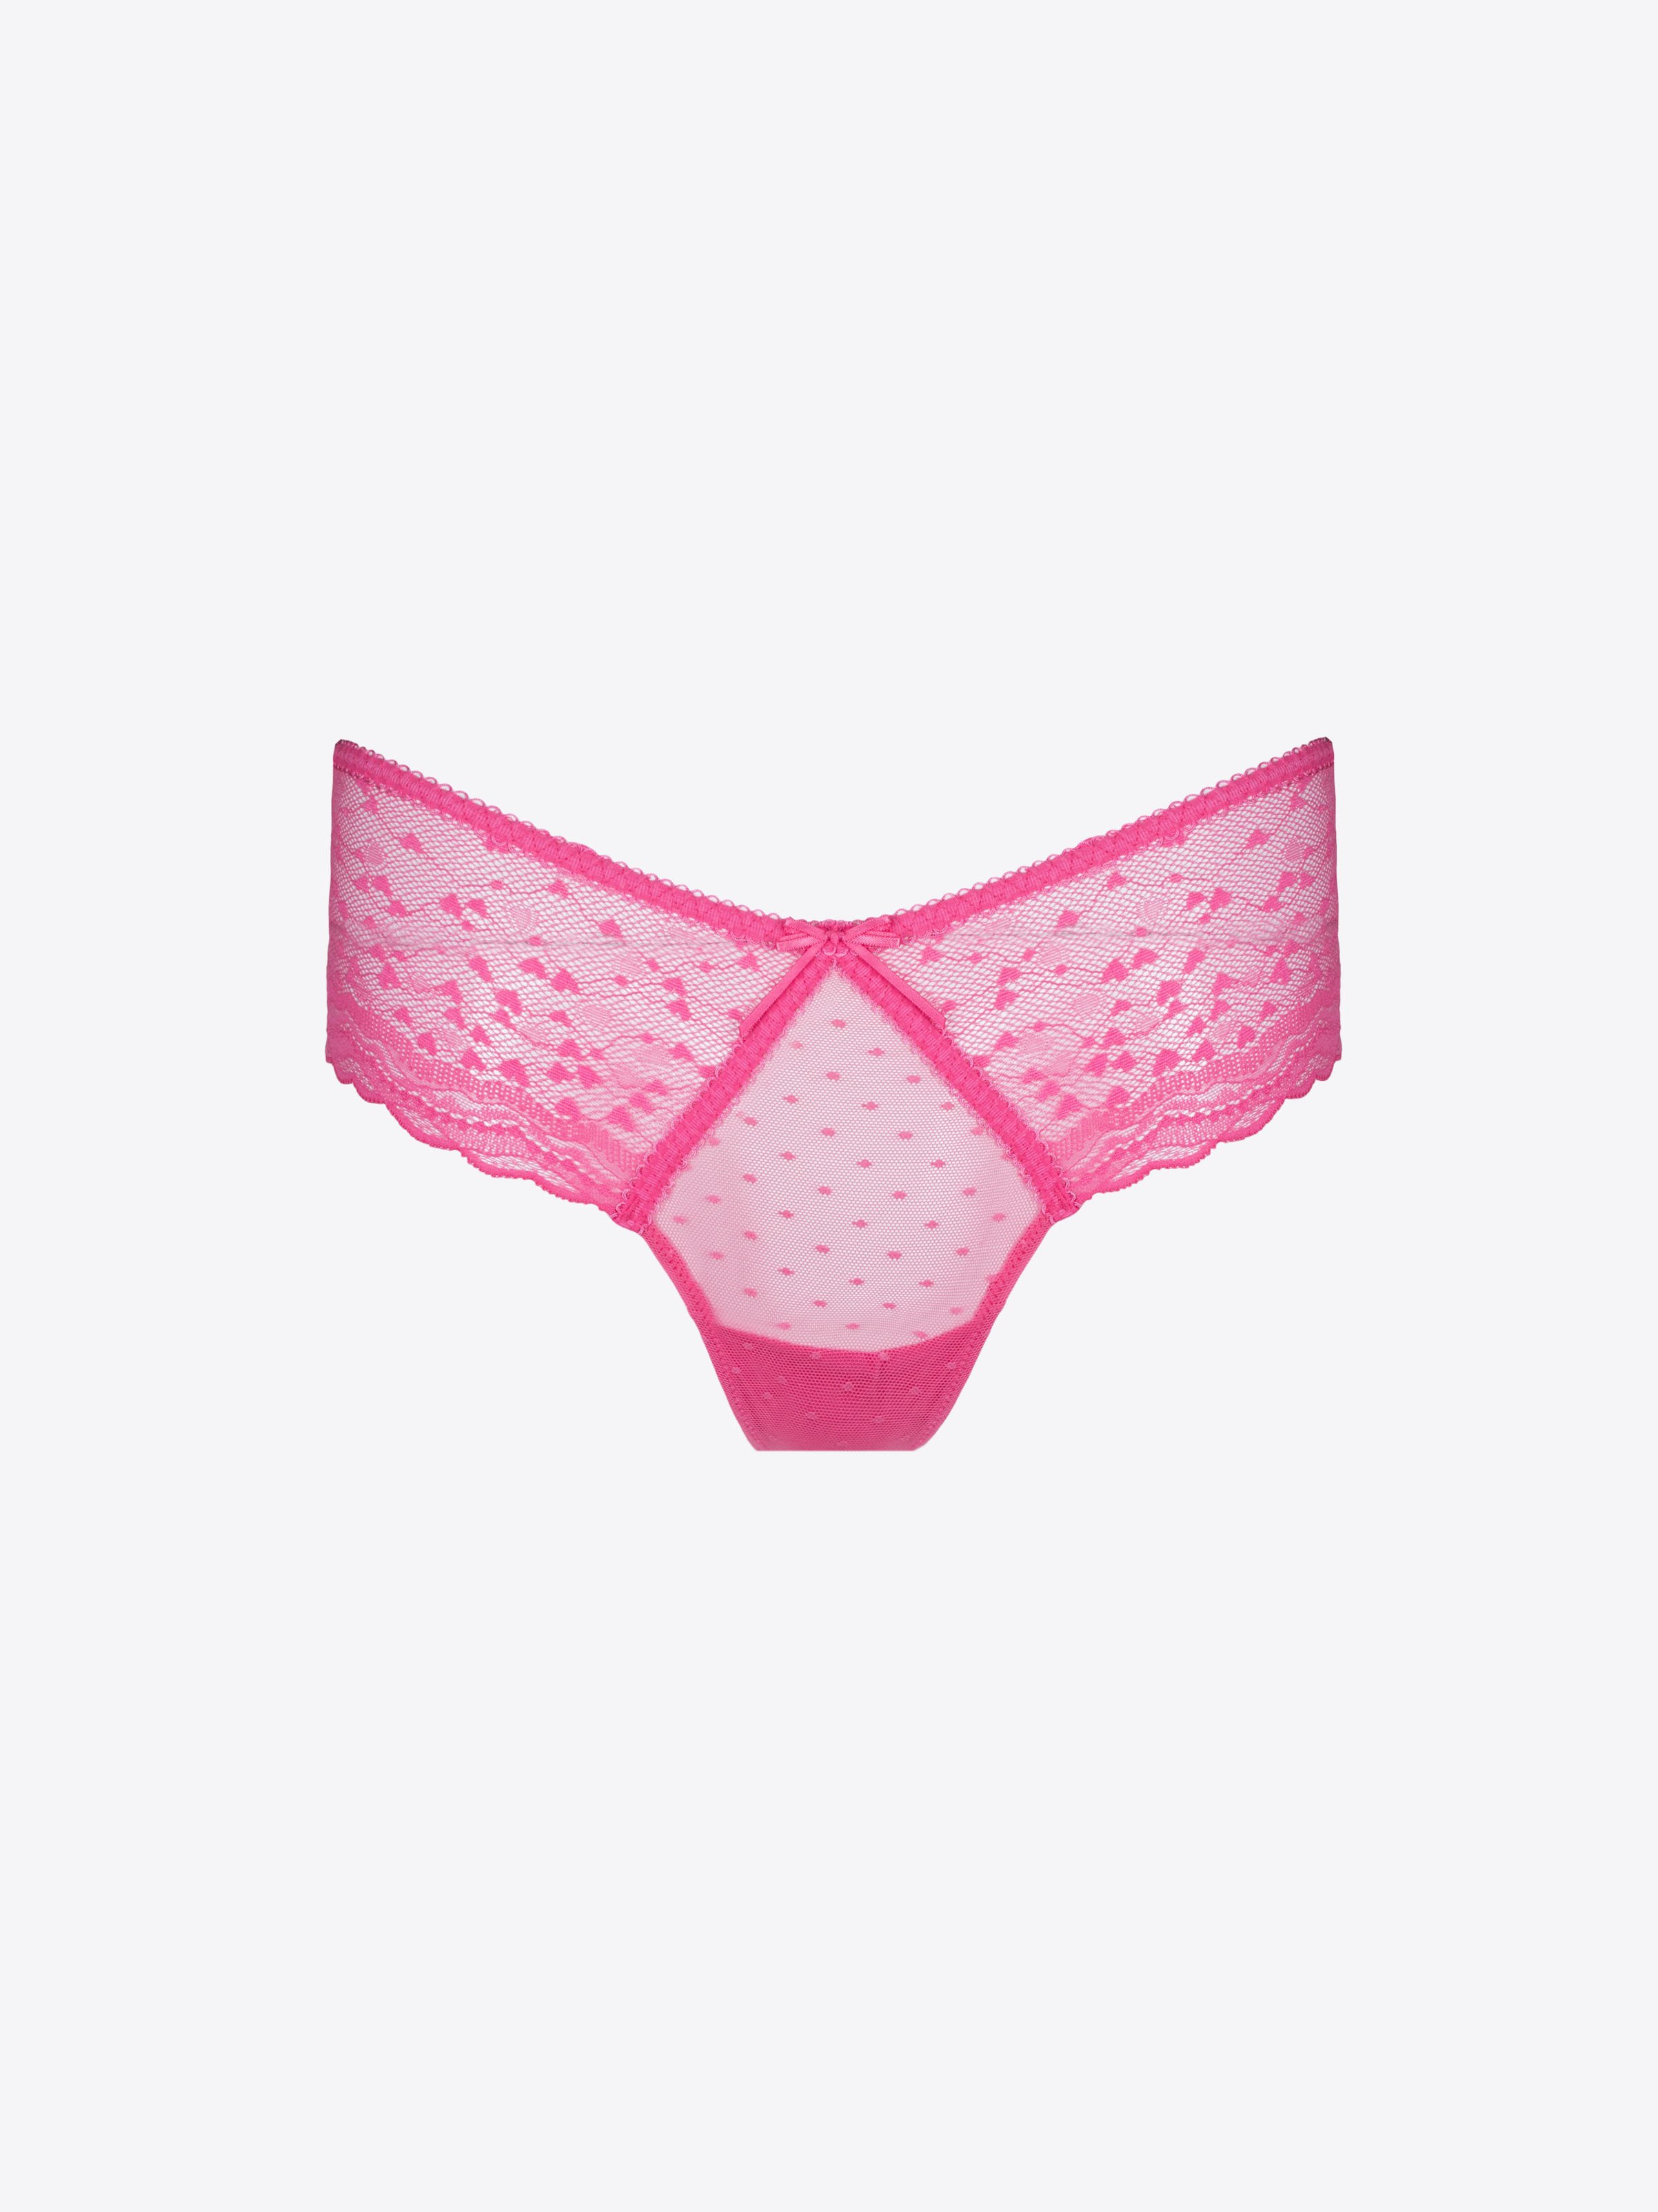 Lucca Triangle Bra - Hot Pink - CA$15.60 - CHANGE Lingerie